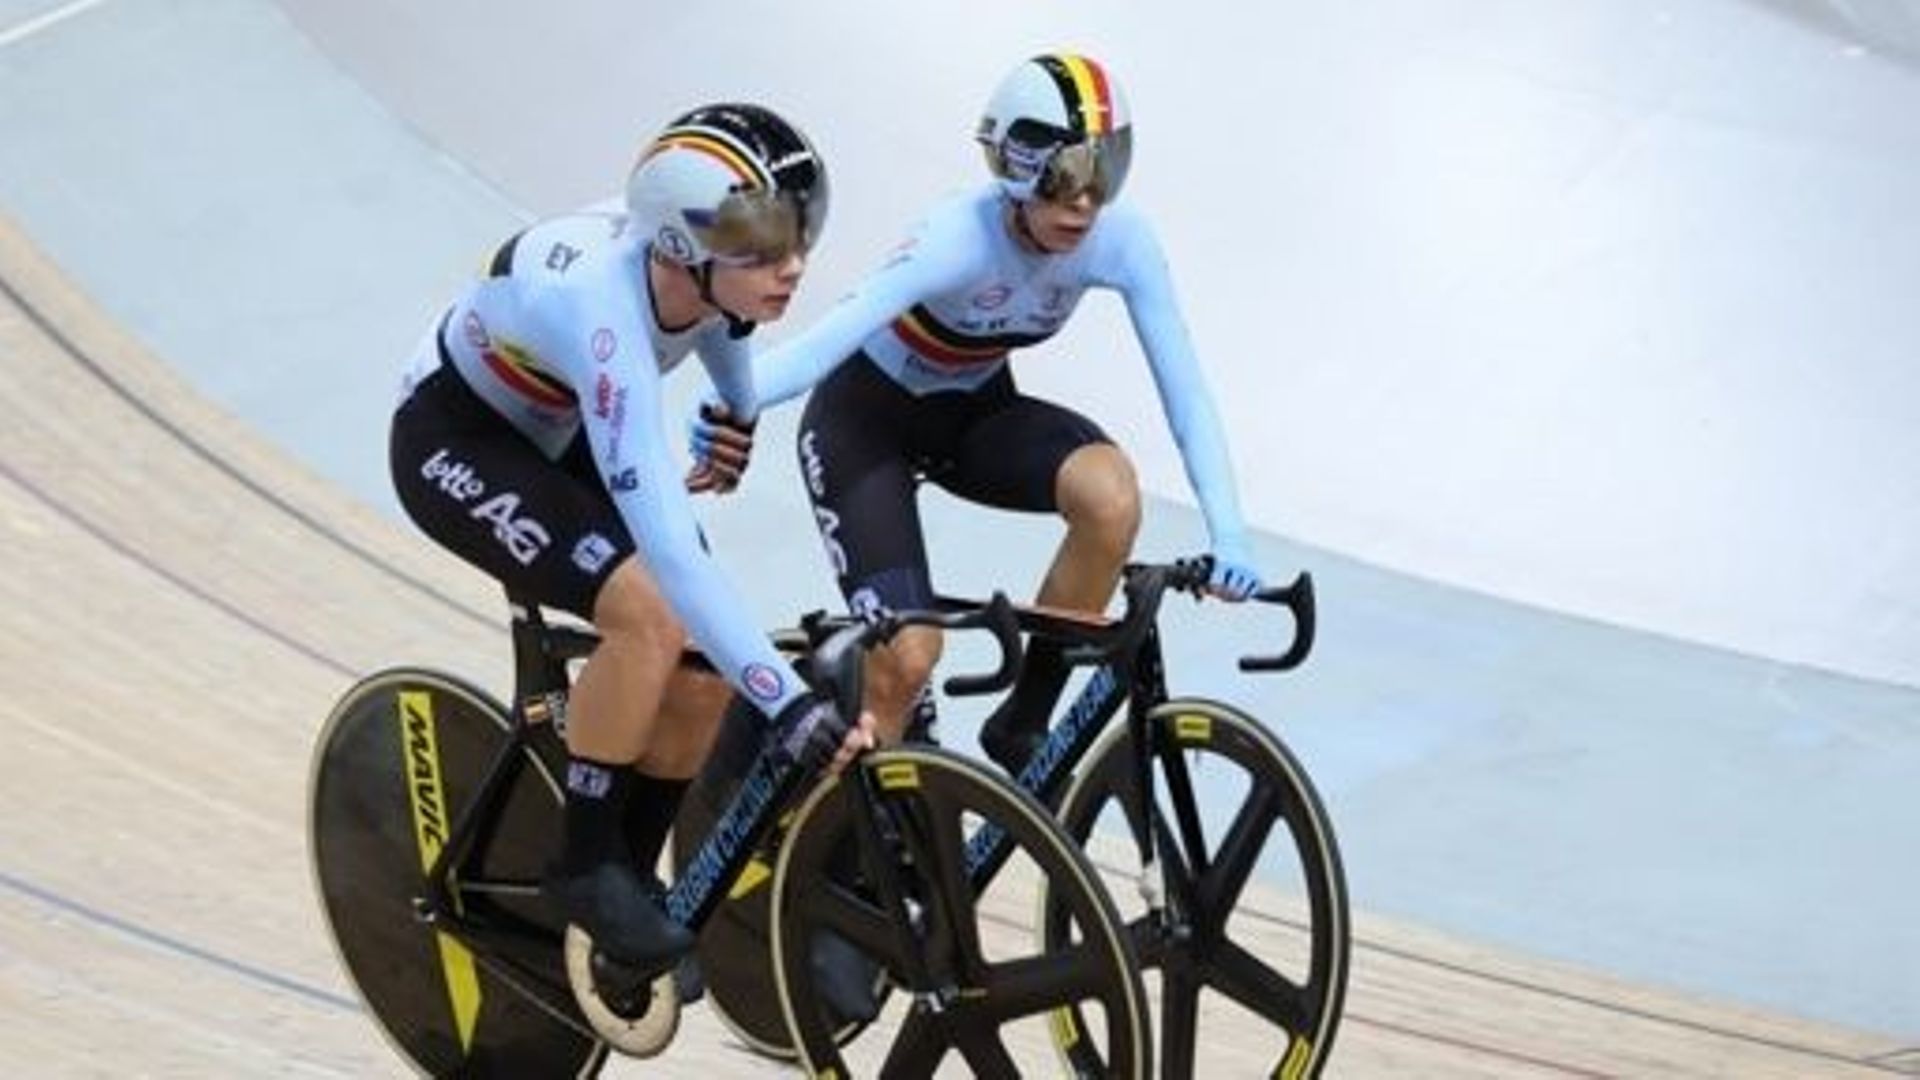 Belgian Lotte Kopecky and Belgian Shari Bossuyt pictured in action during the women's Madison race on day four of the UCI Track World Championships, at the Saint-Quentin-en-Yvelines velodrome in Montigny-le-Bretonneux, France, Saturday 15 October 2022. Th